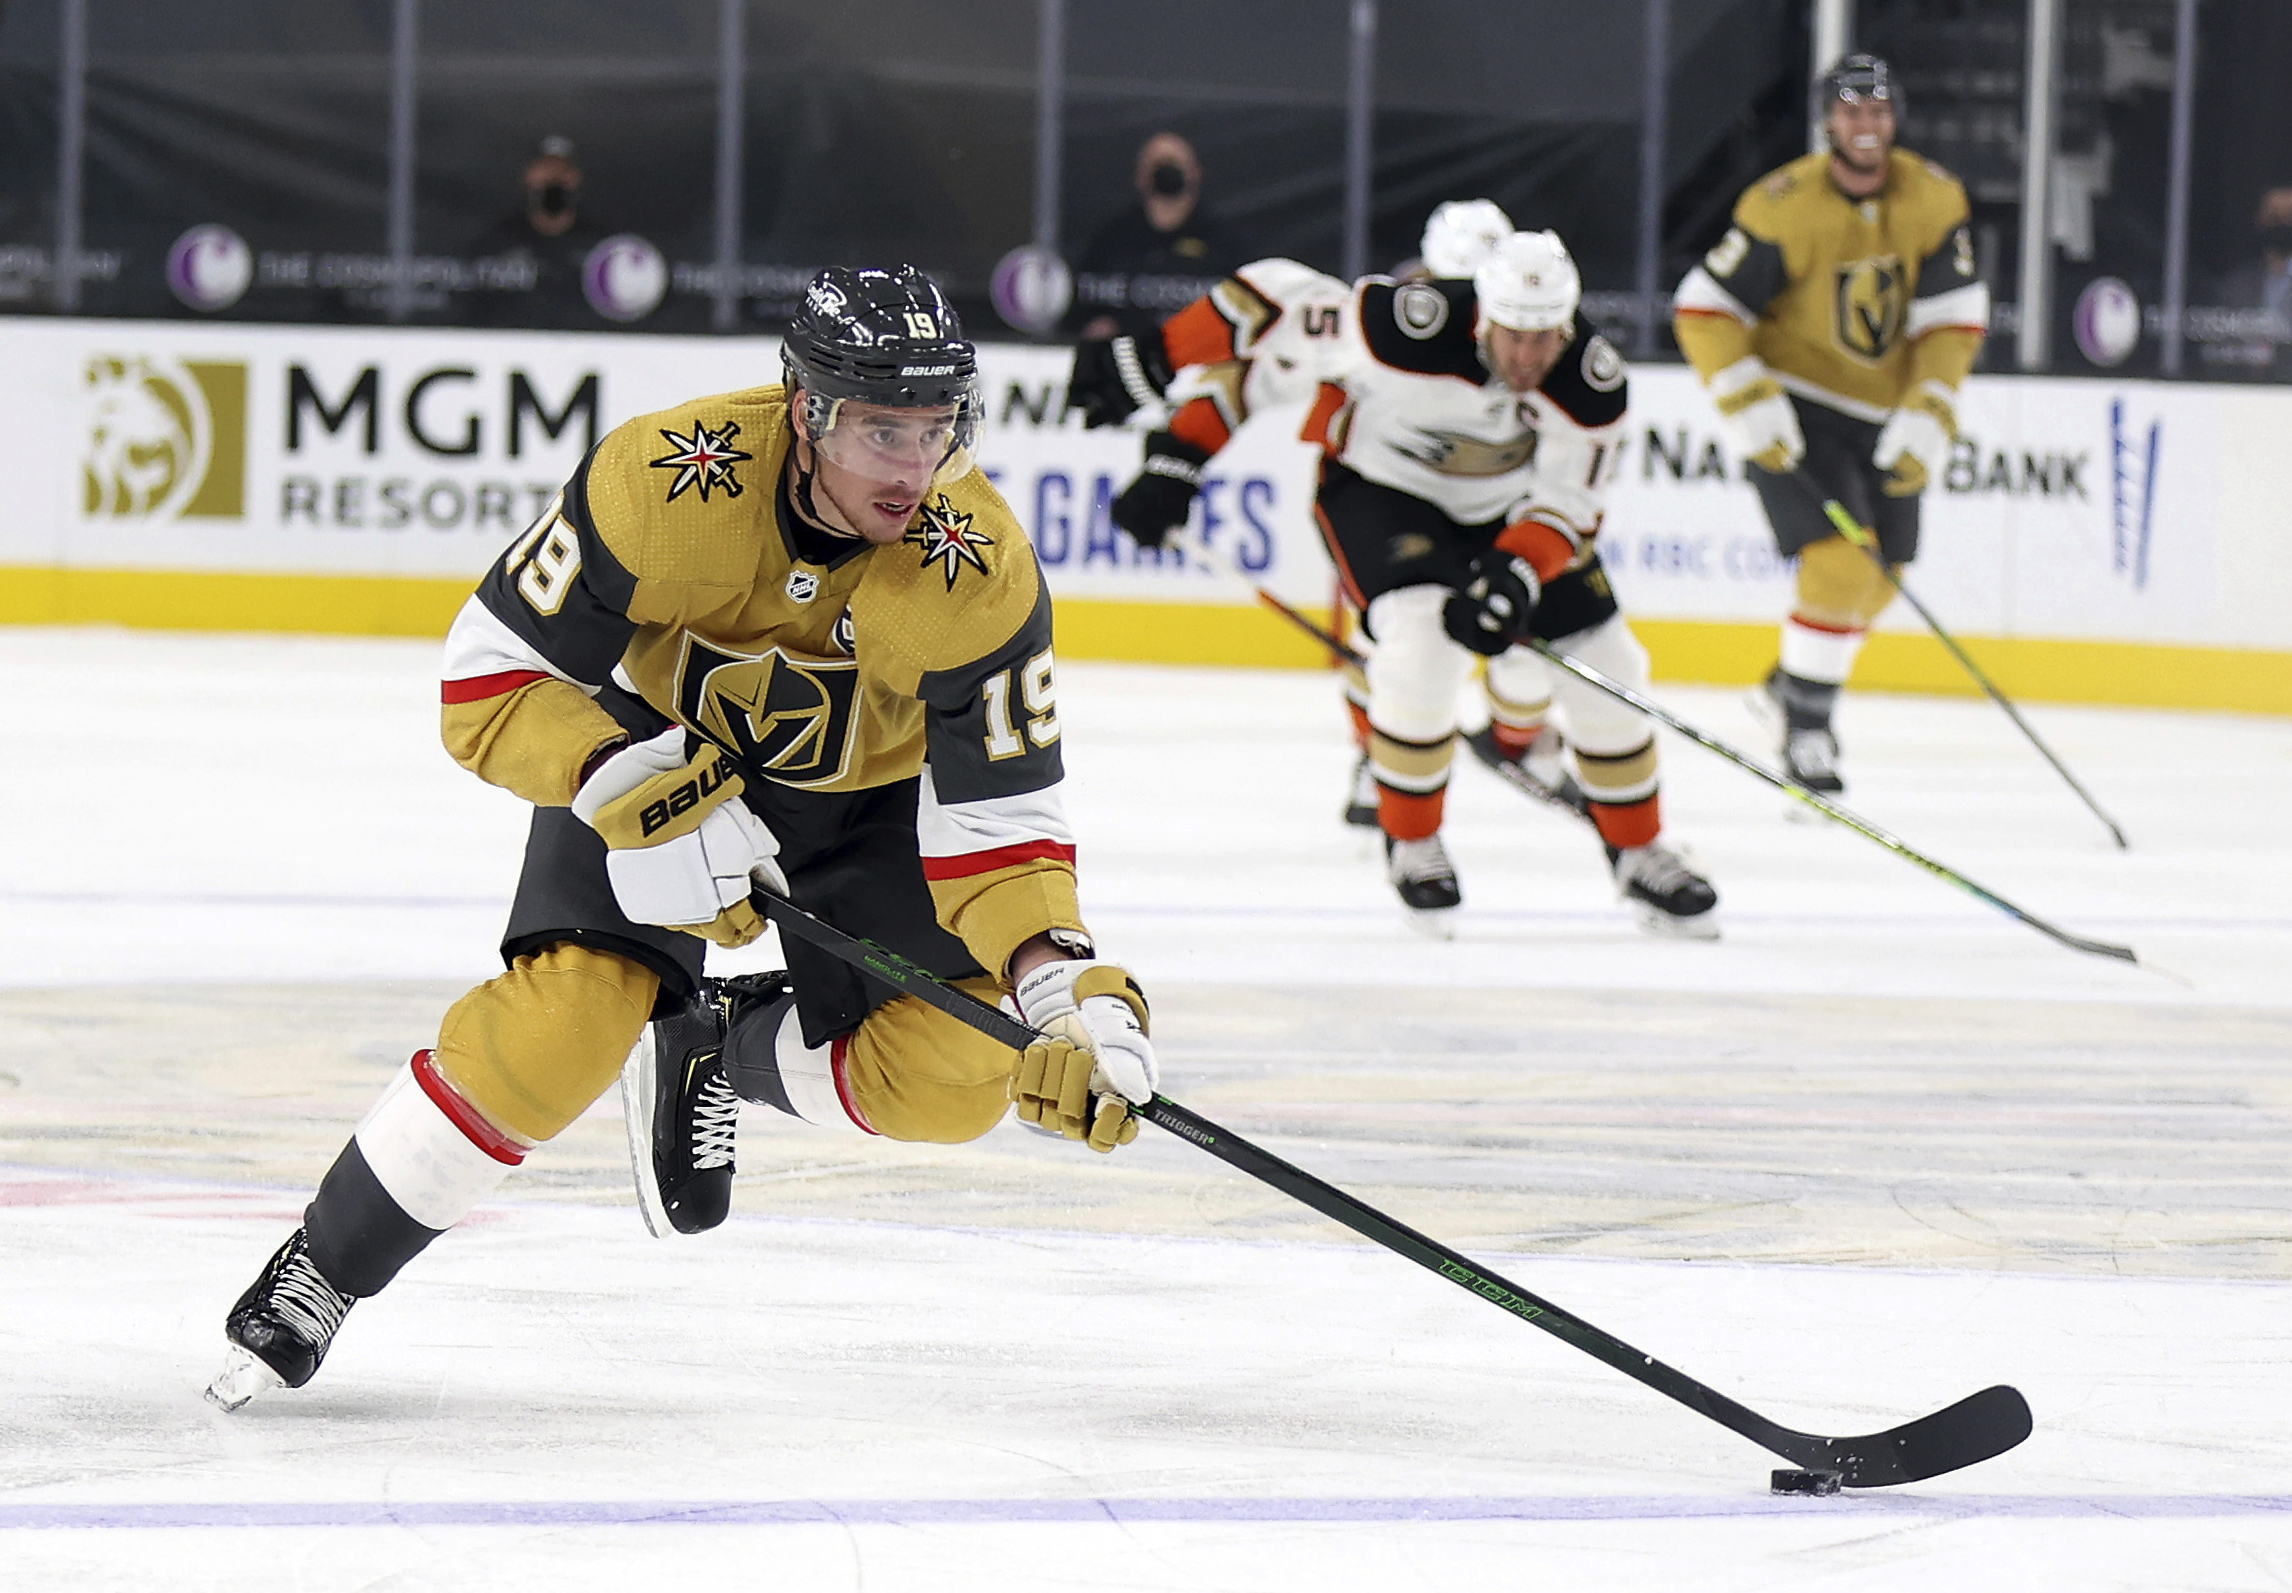 NHL How to LIVE STREAM FREE the Vegas Golden Knights at Minnesota Wild Wednesday (3-10-21)